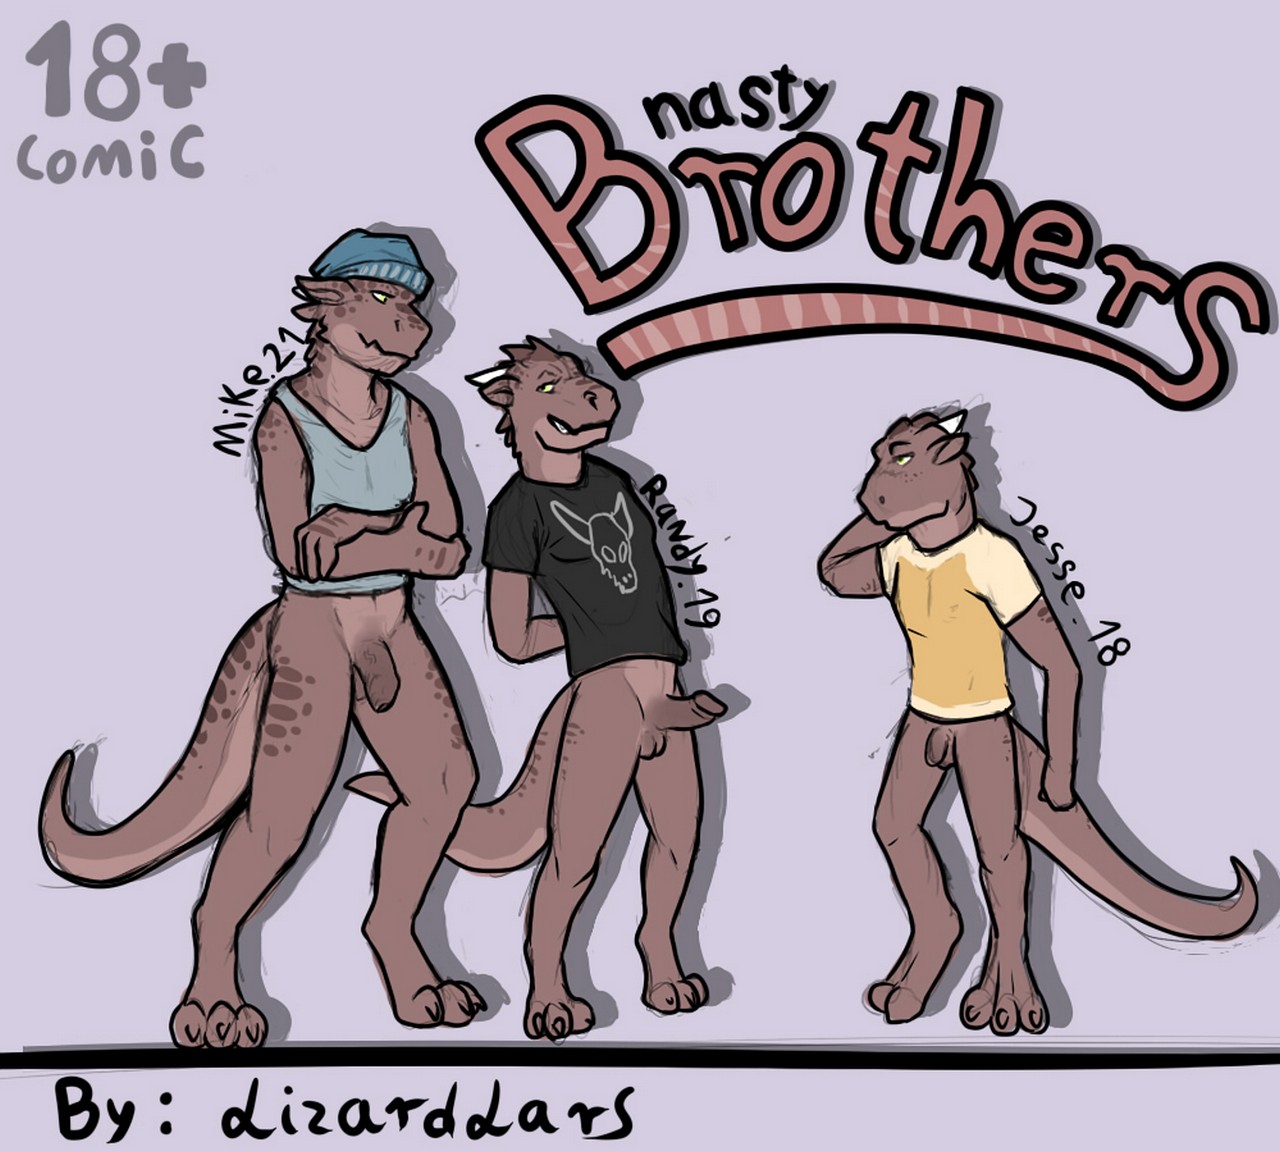 Nasty Brothers00